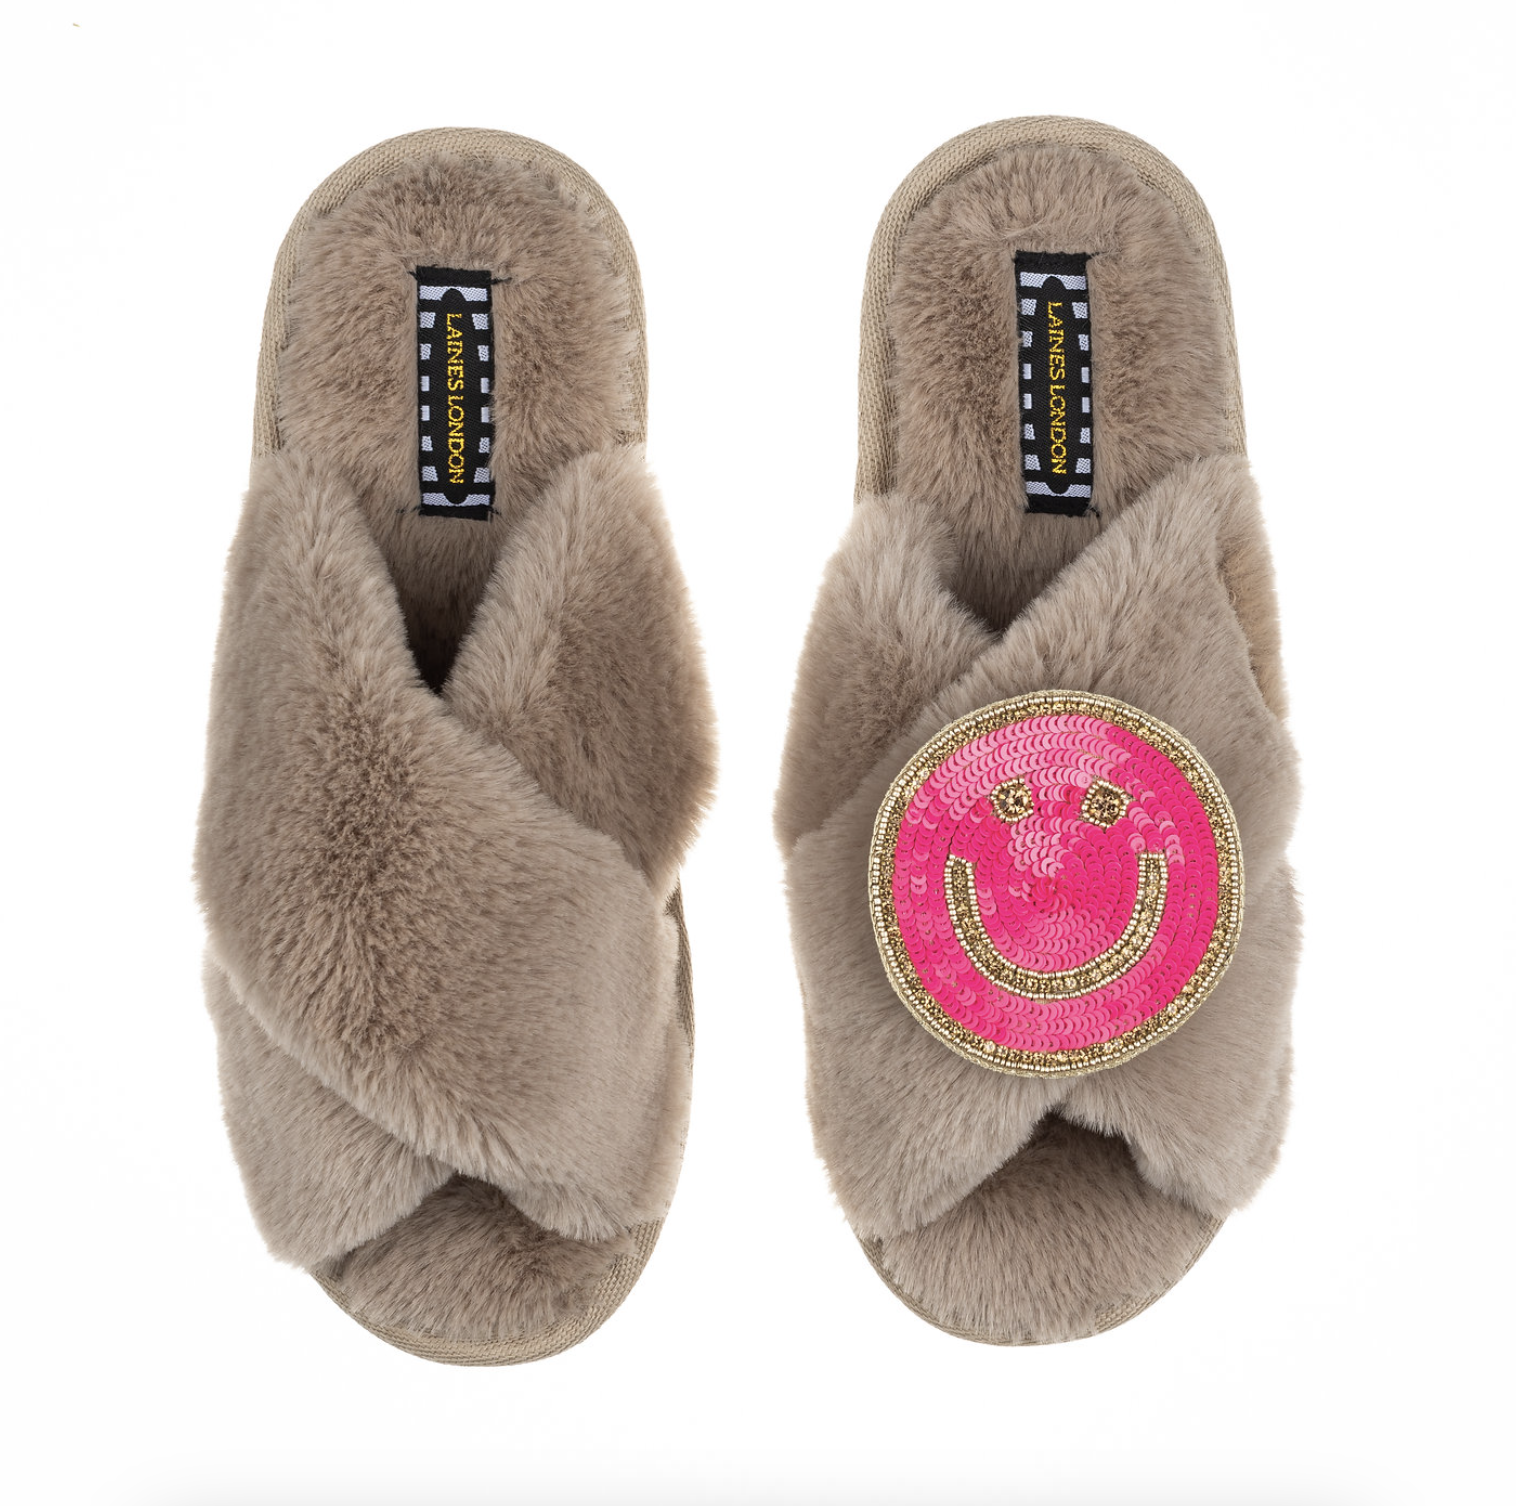 Laines London Classic Slipper With Smiley Brooch - Toffee